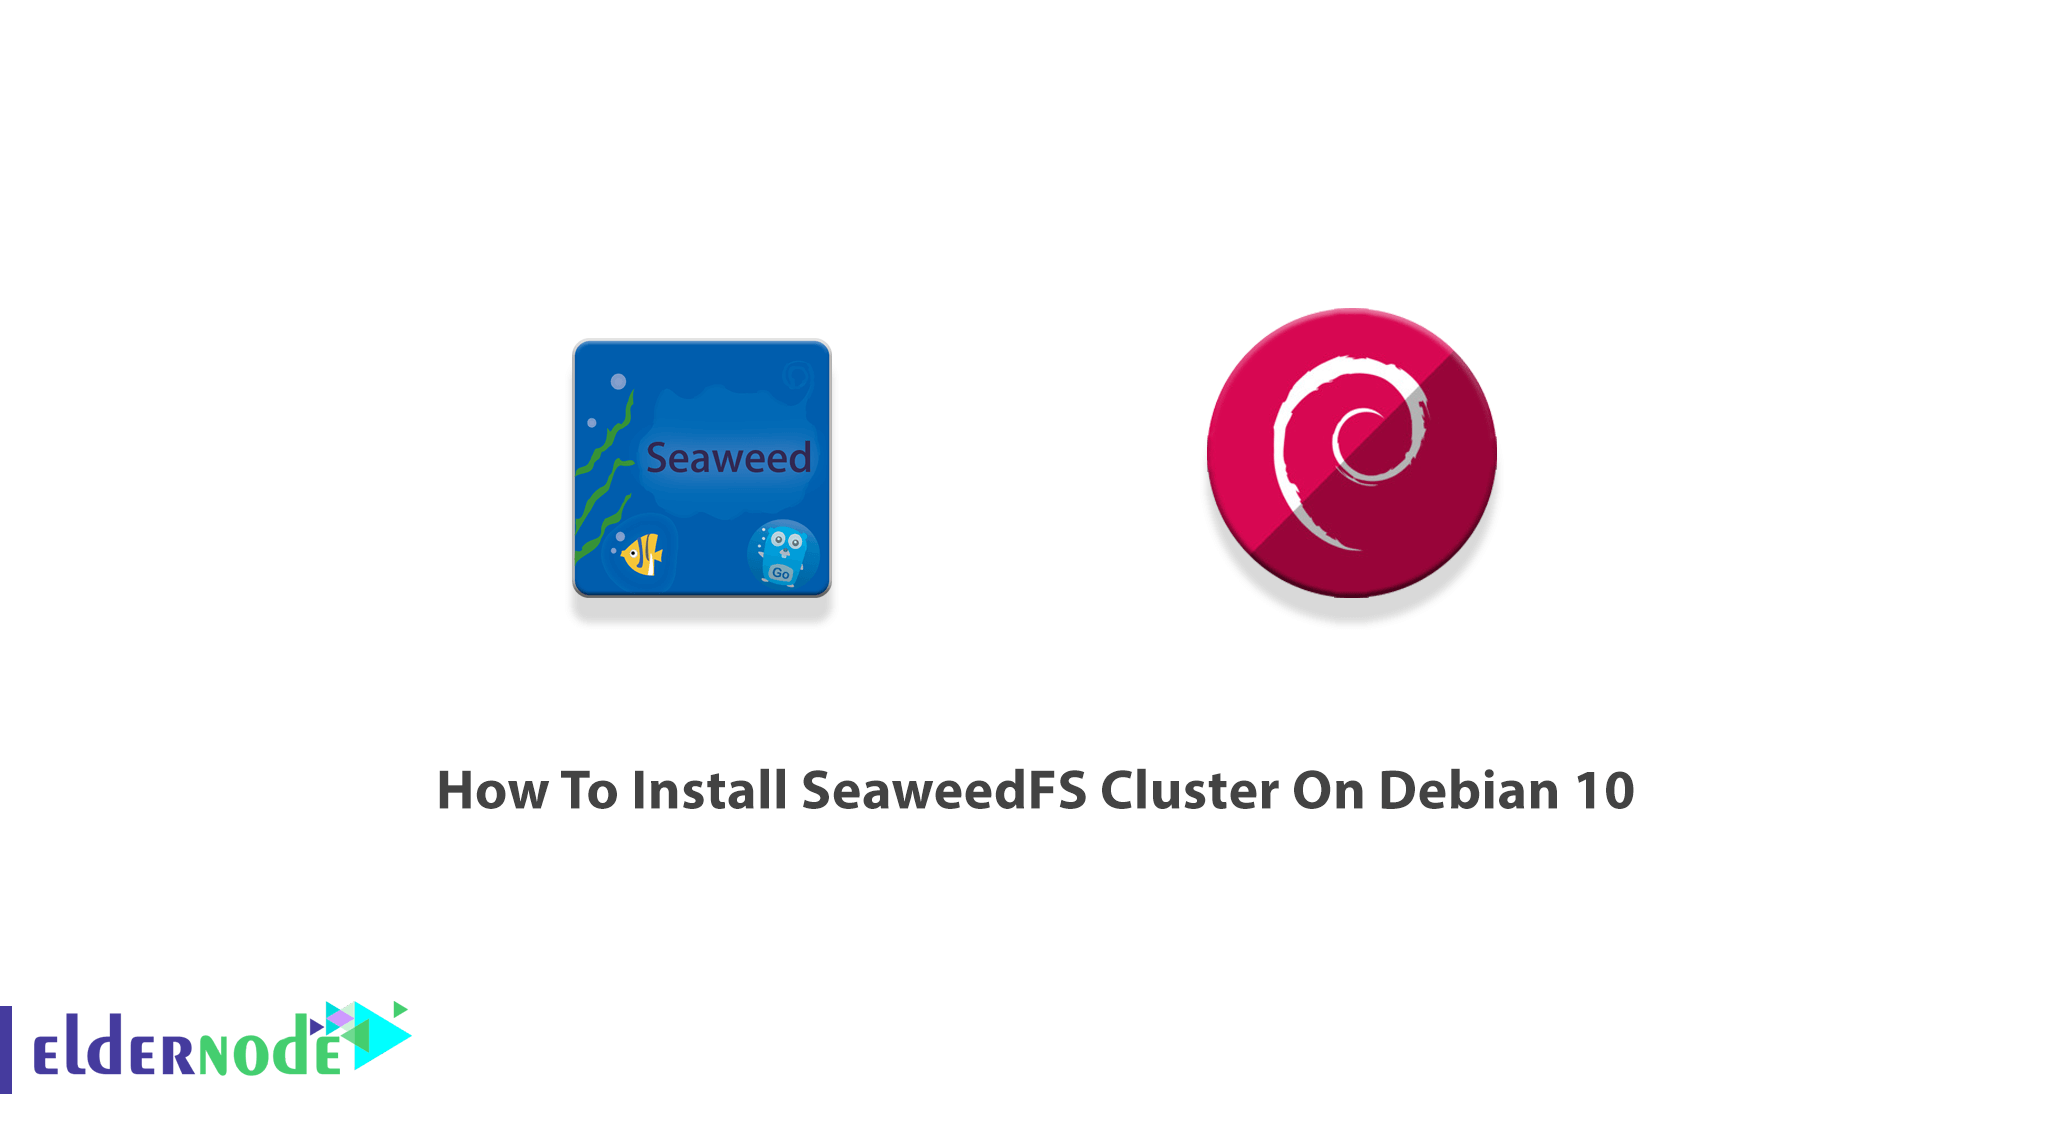 How To Install SeaweedFS Cluster On Debian 10